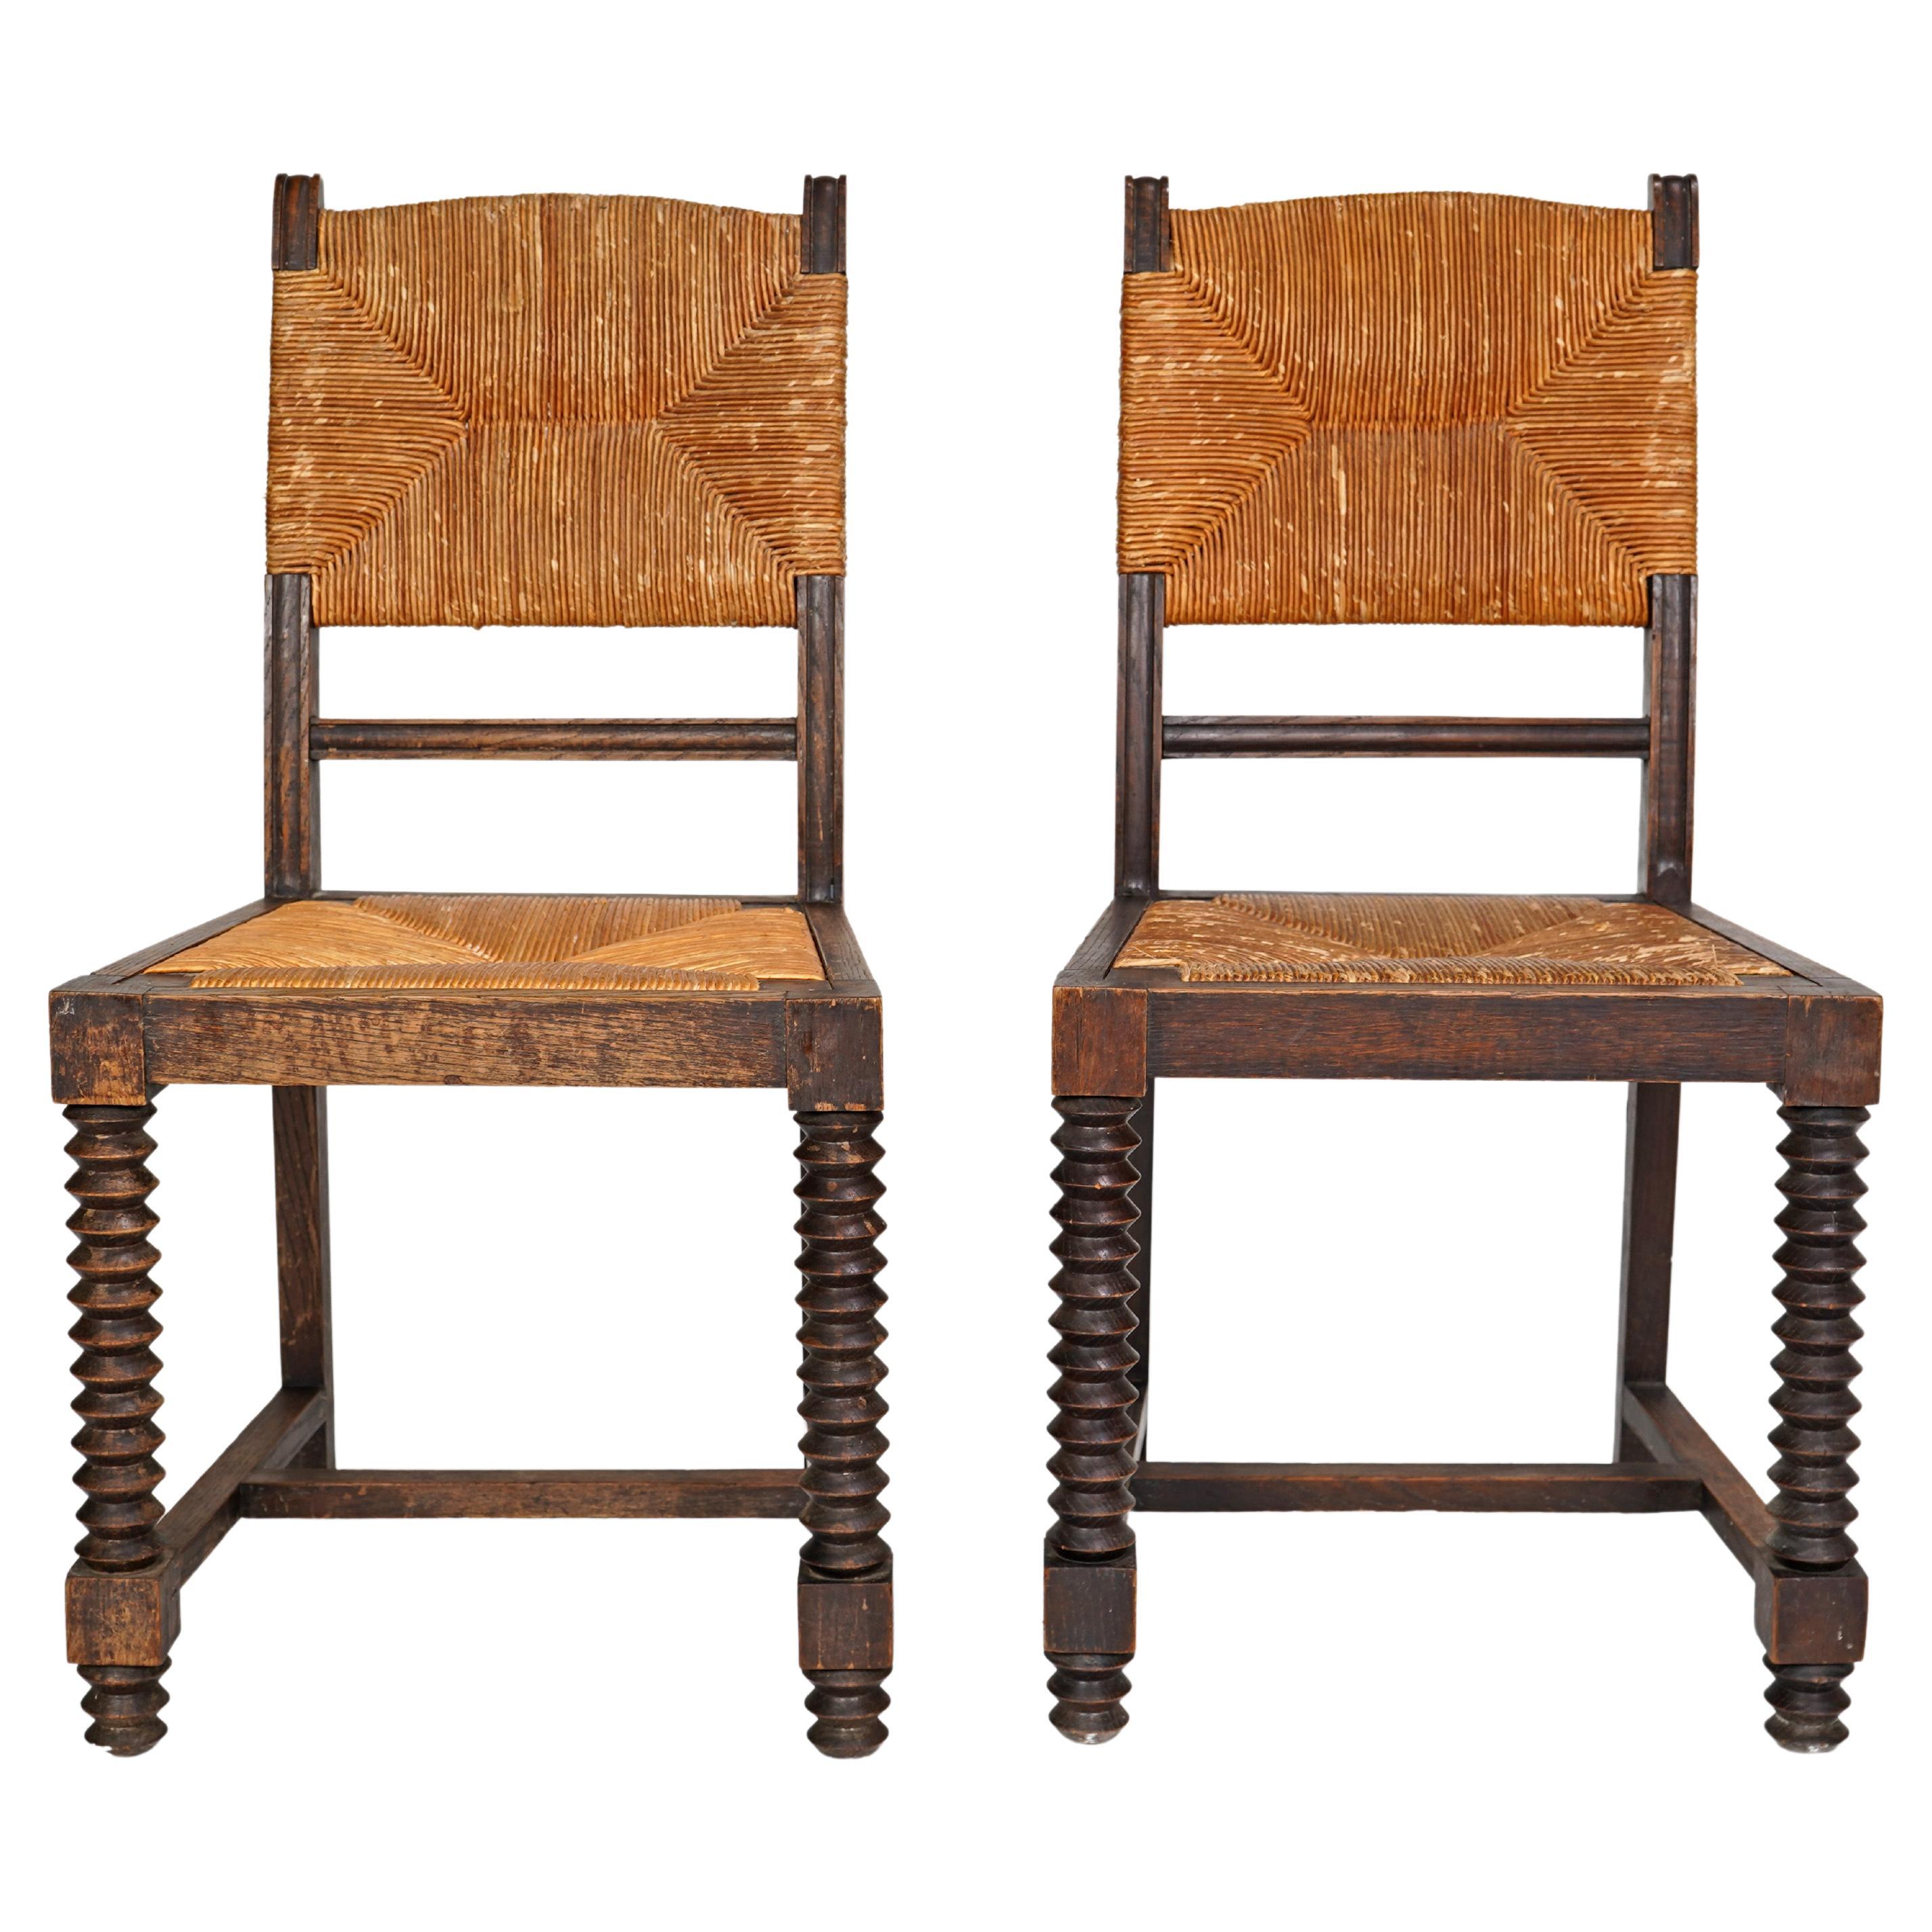 Pair Of French Charles Dudouyt Style Chairs - Wooden with Rush Seat